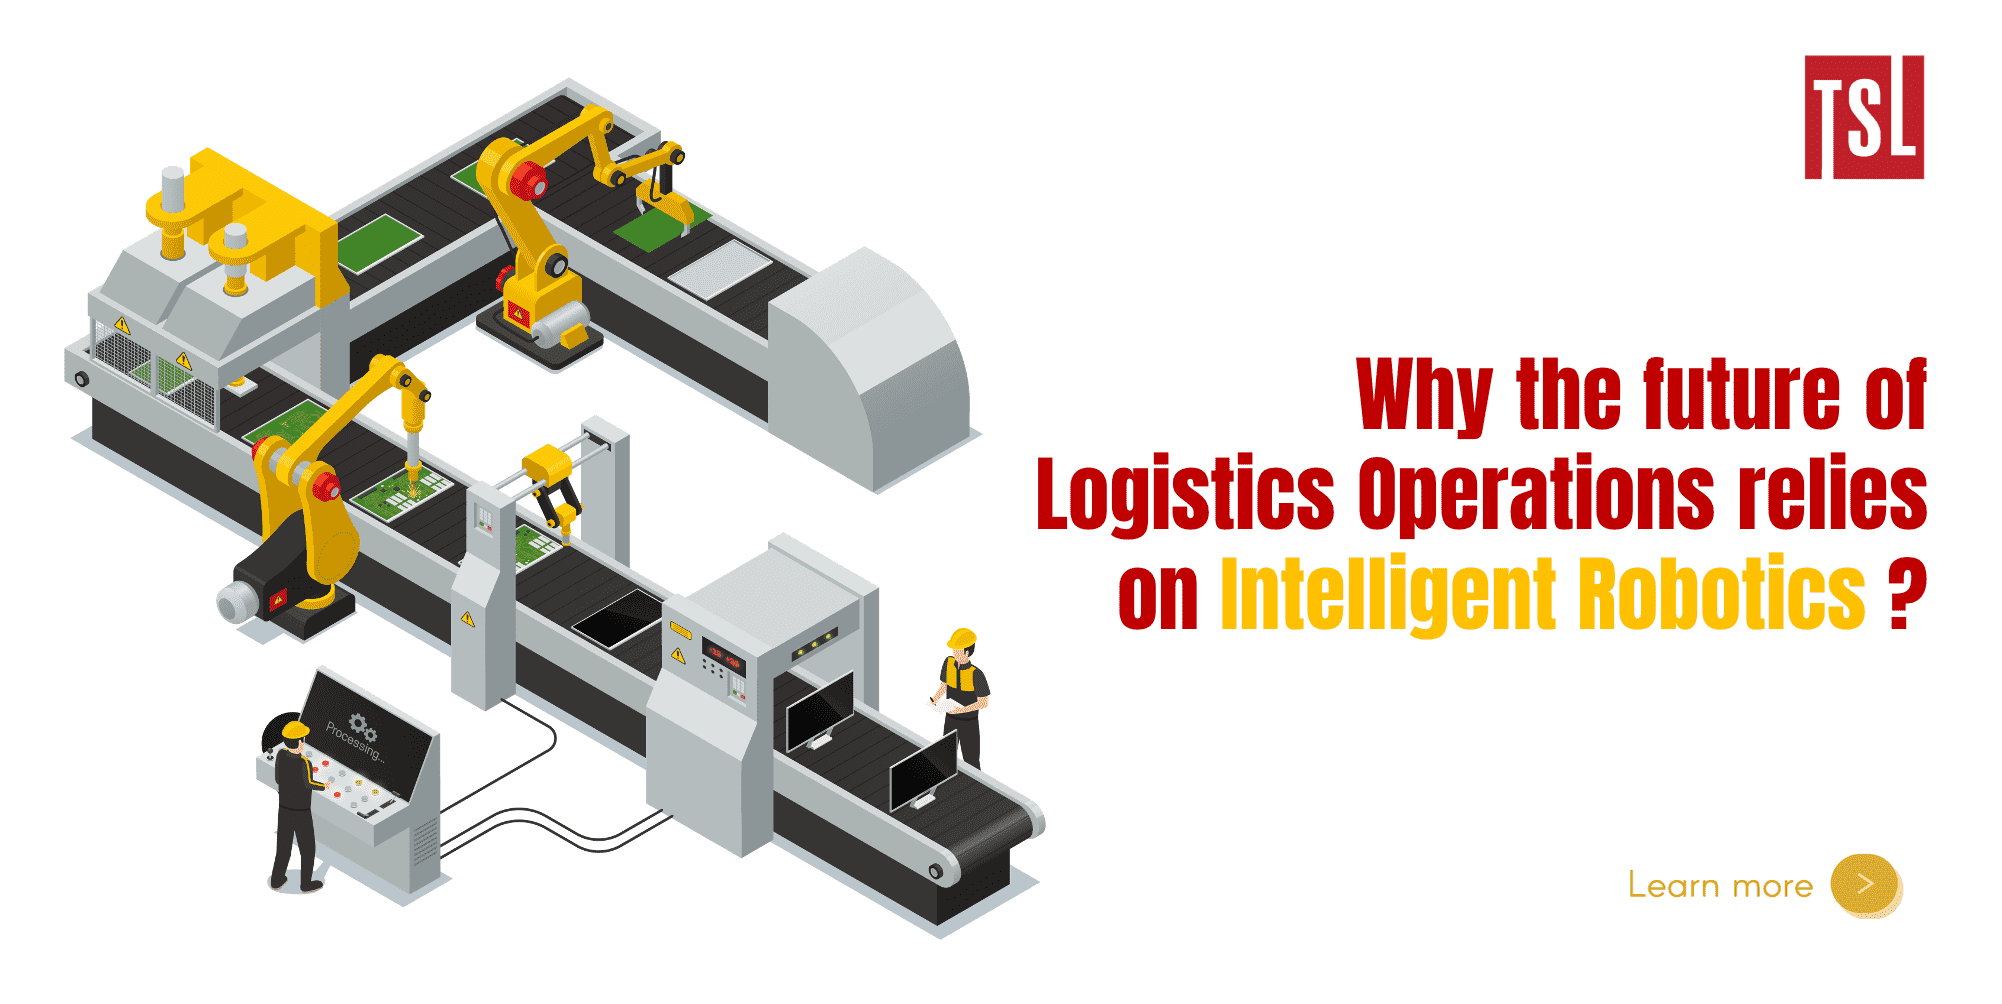 Why the future of Logistics operations relies on Intelligent Robotics?